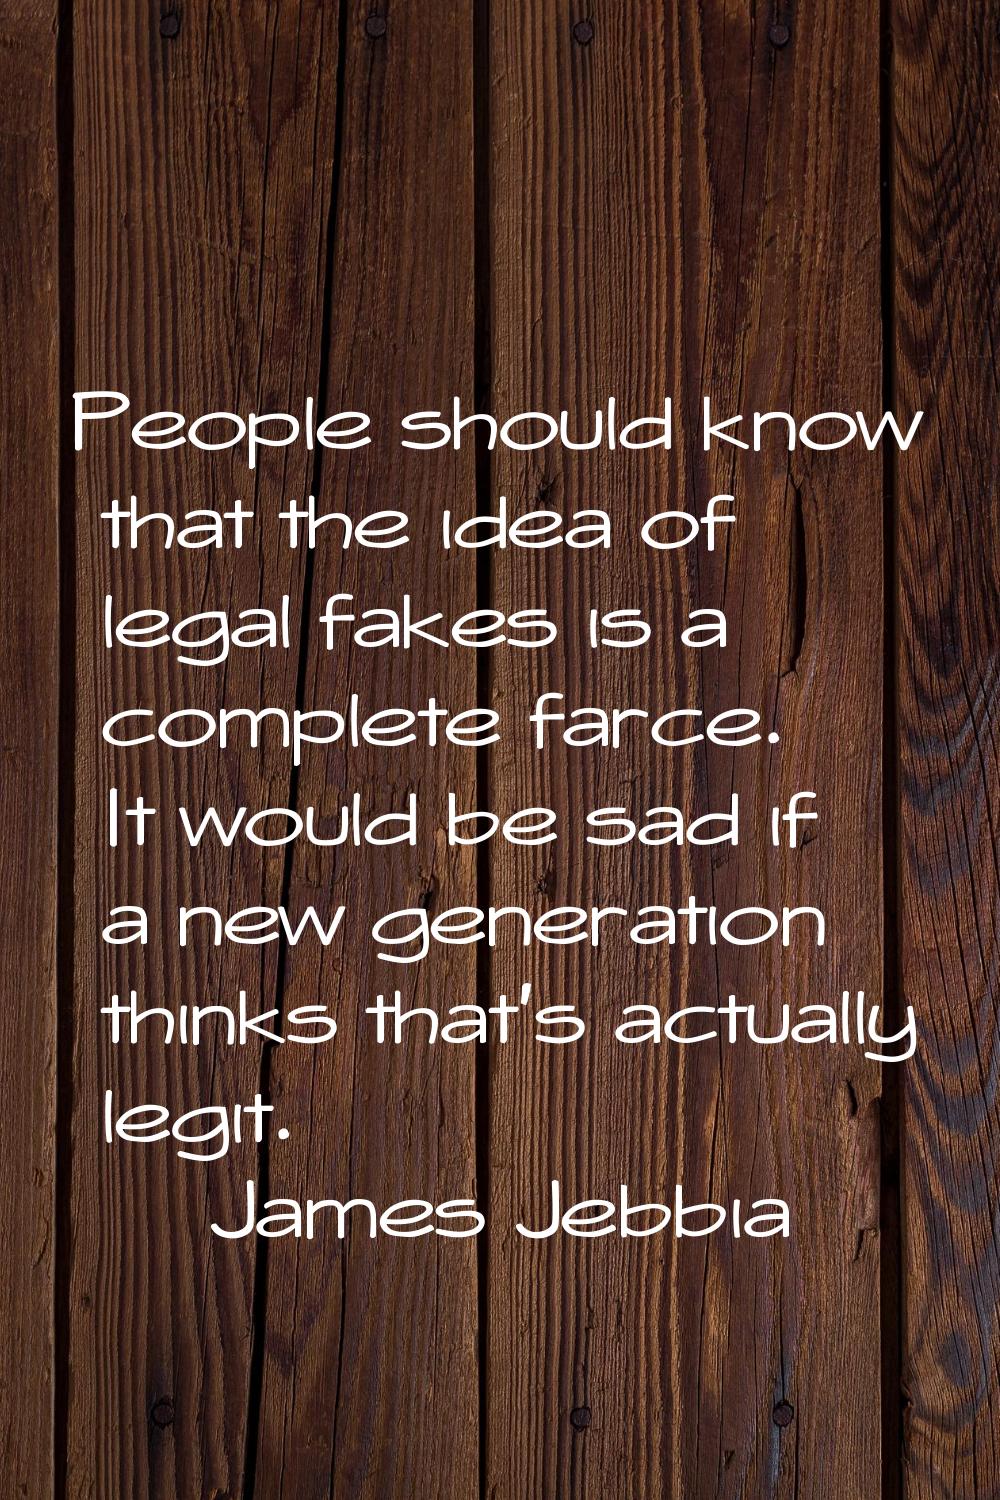 People should know that the idea of legal fakes is a complete farce. It would be sad if a new gener